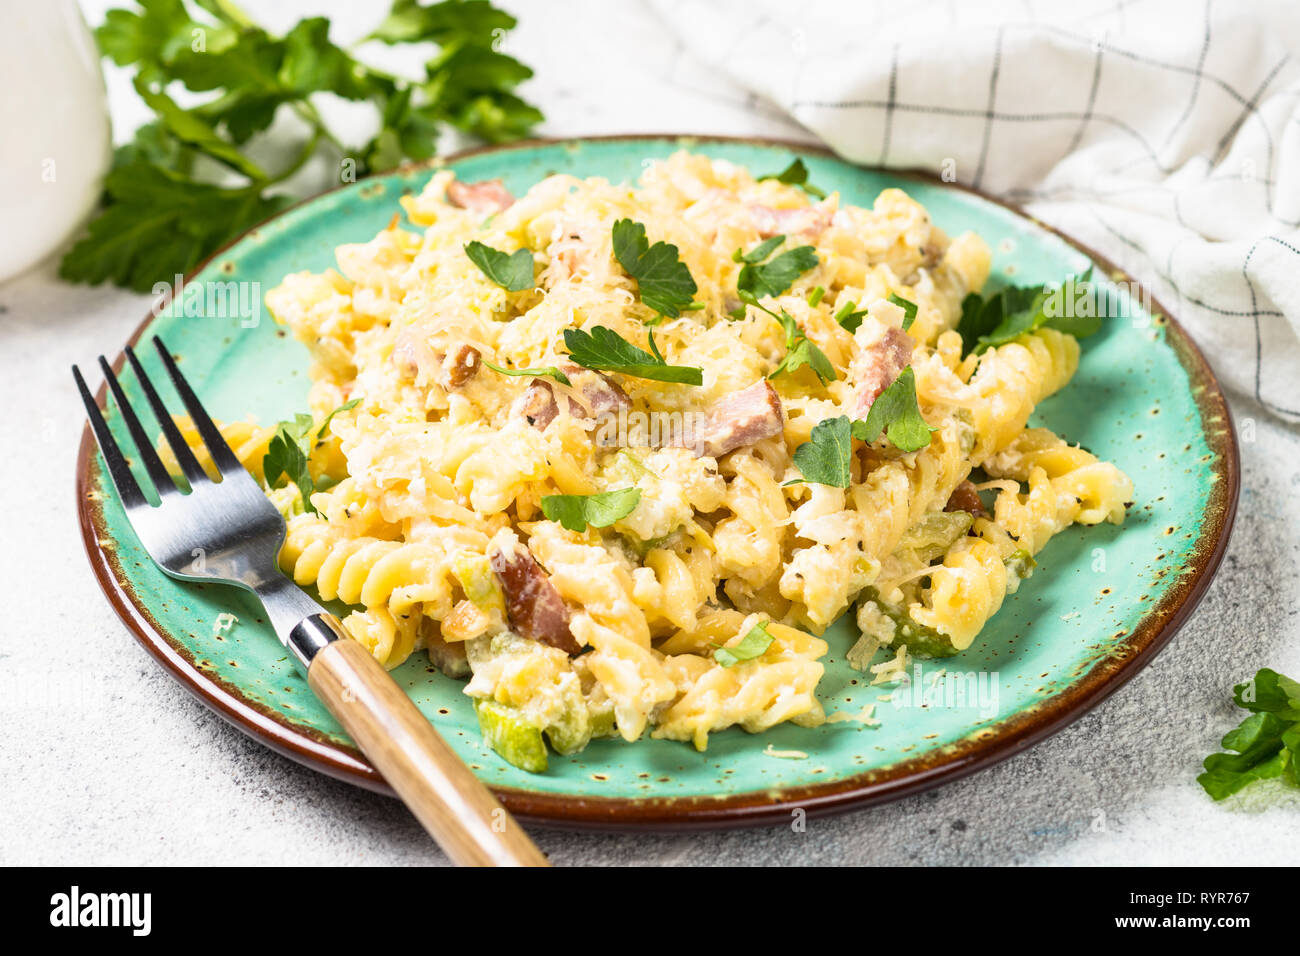 Pasta carbonara with zucchini in craft plate on white.  Stock Photo